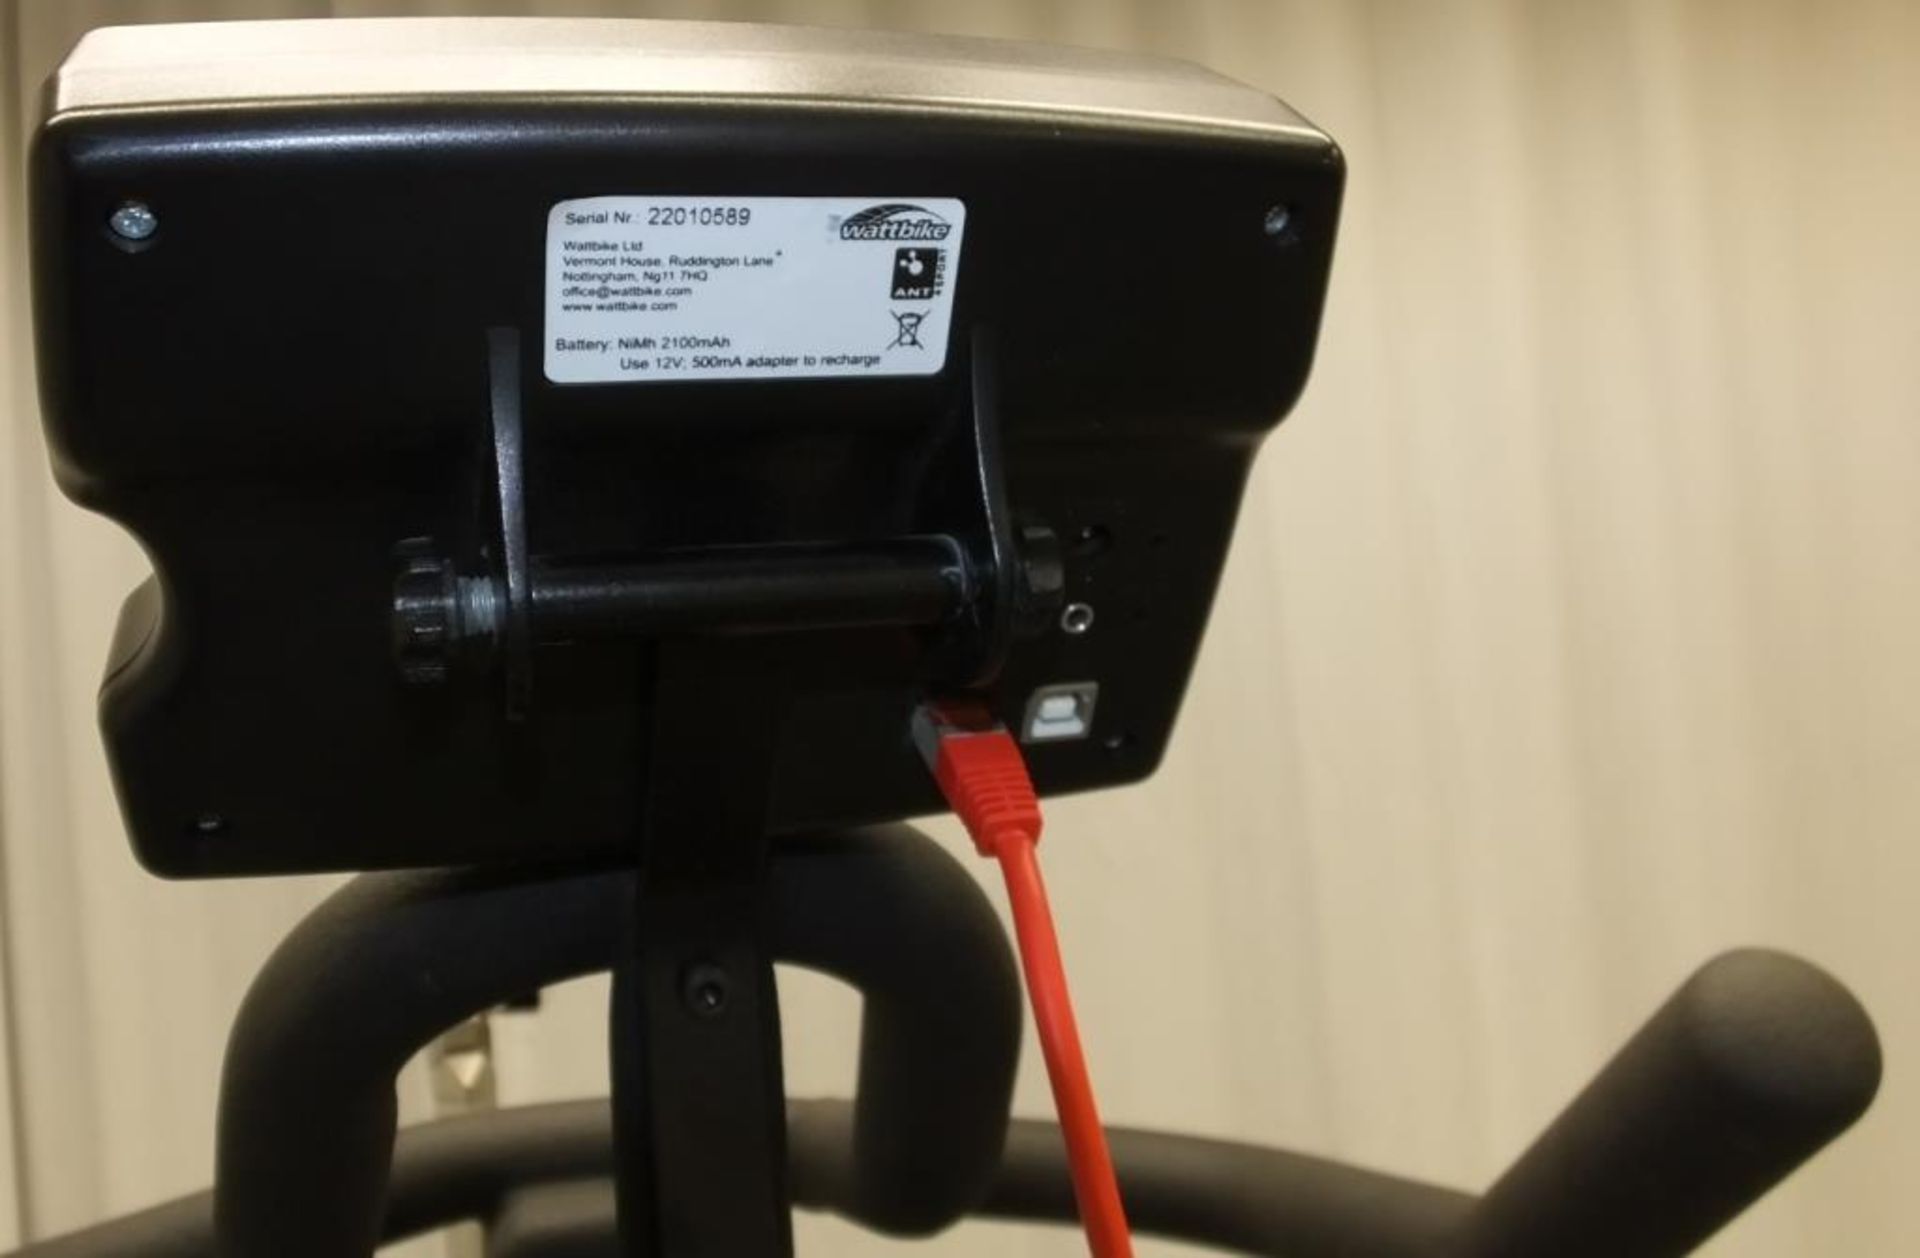 Wattbike Training Exercise Bike - console does not powers up - missing rear foot - Image 7 of 7